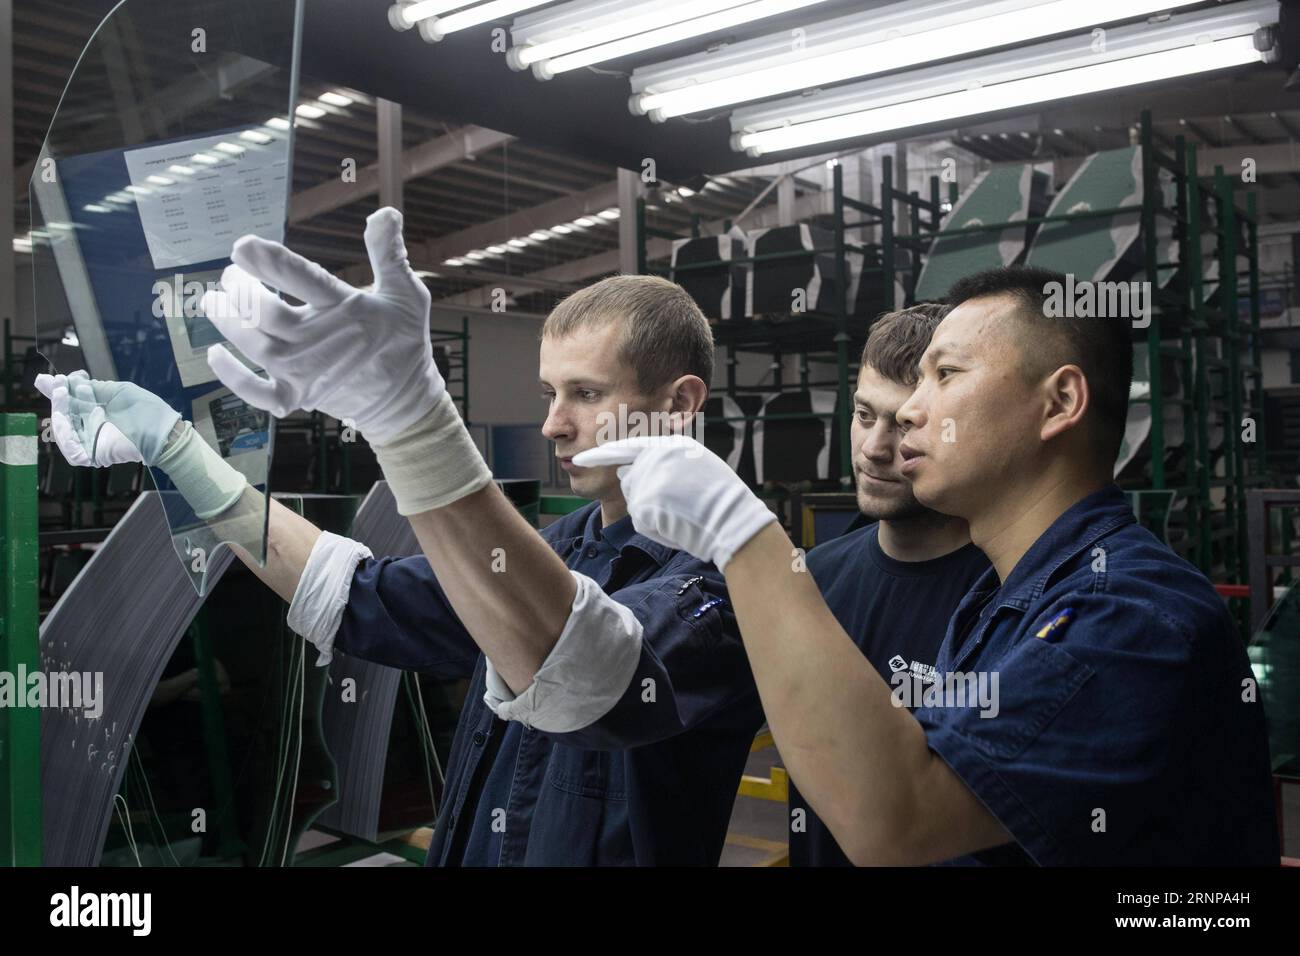 (170818) -- KALUGA, Aug. 18, 2017 -- Chinese and Russian workers work at an automobile-level float glass production line in the Russian factory of China s Fuyao Glass Industry Group Co. in Kaluga, Russia, July 18, 2017. Fuyao Group is a well-known Chinese enterprise that specializes in producing automobile safety glass and industrial technological glass. Fuyao invested in 2011 some 200 million U.S. dollars to build automobile-level float glass production lines in Kaluga. ) (gj) RUSSIA-KALUGA-CHINA-FUYAO GLASS GROUP-RUSSIAN FACTORY WuxZhuang PUBLICATIONxNOTxINxCHN   Kaluga Aug 18 2017 Chinese a Stock Photo